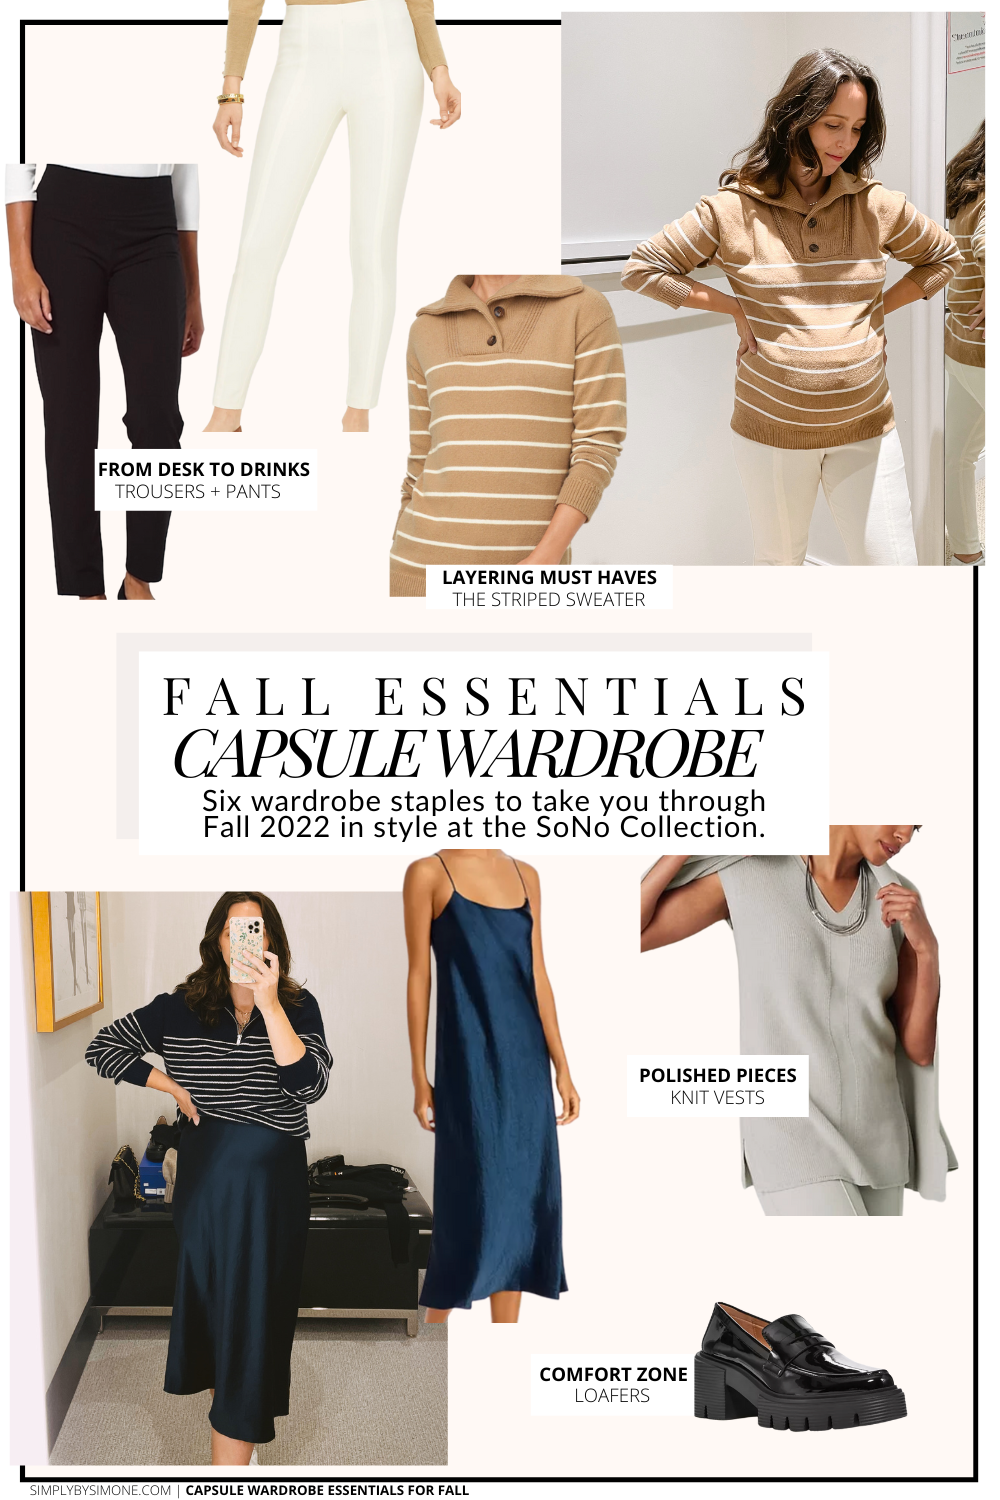 https://simplybysimone.com/wp-content/uploads/2022/08/Capsule-Wardrobe-Essentials-for-Fall-2022-What-to-wear-this-Fall-2022-The-SoNo-Collection.png